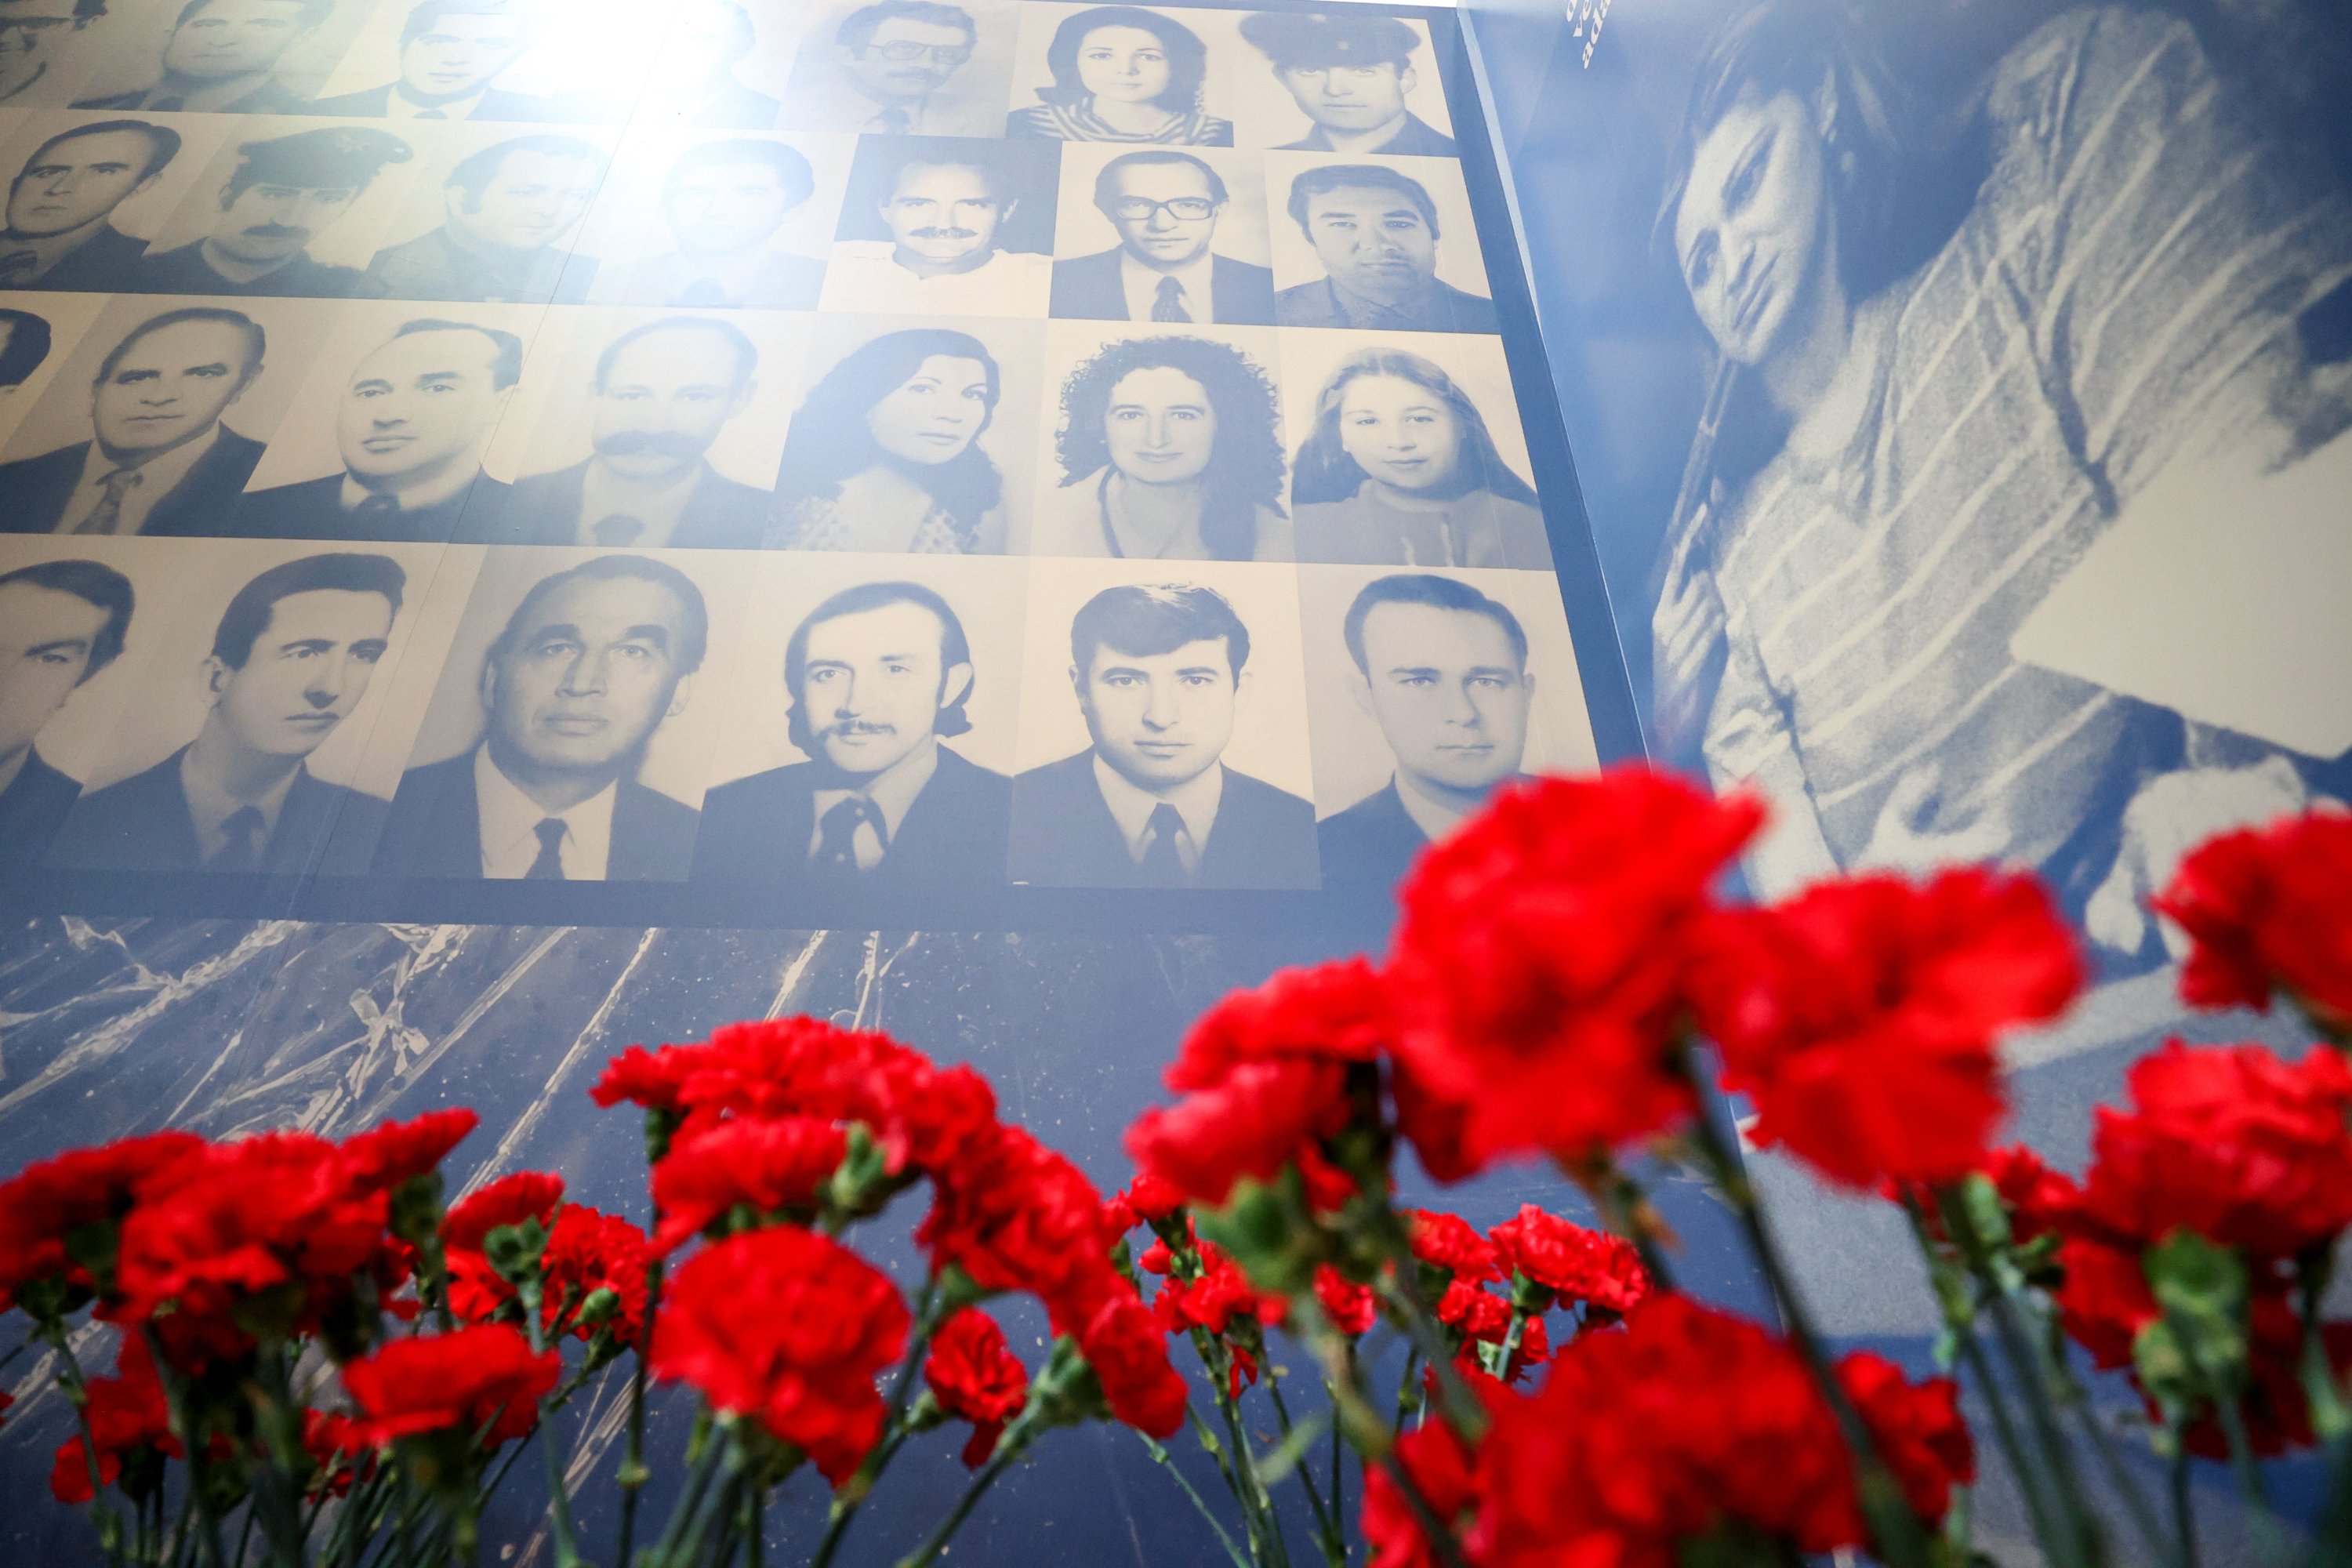 Turkey’s Directorate of Communications opens an exhibition in memory of Turkish diplomats killed by Armenian terrorists, in Los Angeles, U.S., on April 24, 2021. (AA)